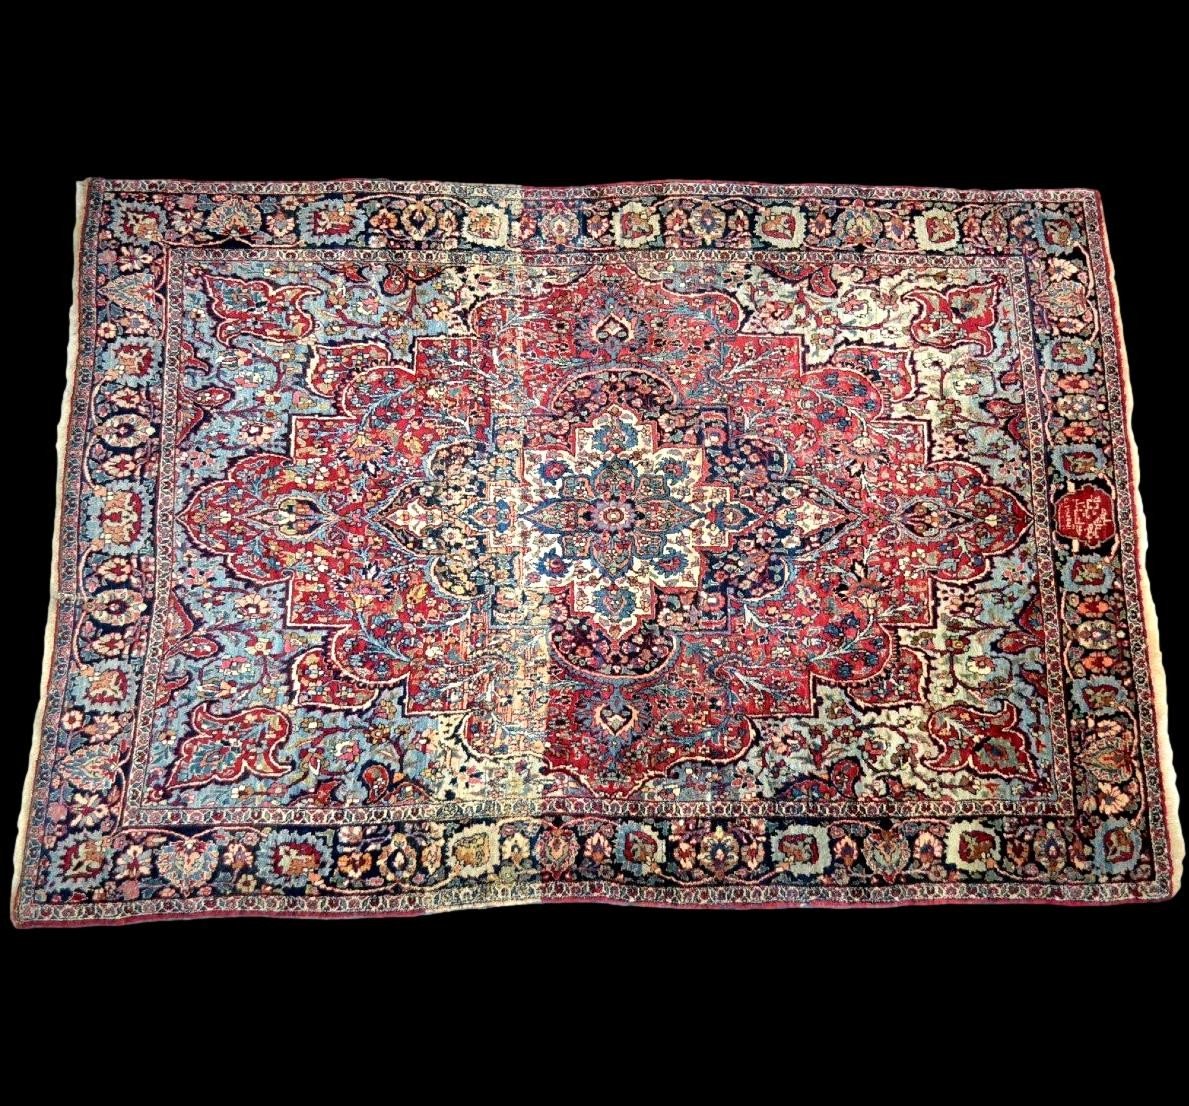 Old Ghoum Rug, 135 Cm X 197 Cm, Signed, Dated, Hand-knotted Wool & Silk, Iran, Very Good Condition-photo-1